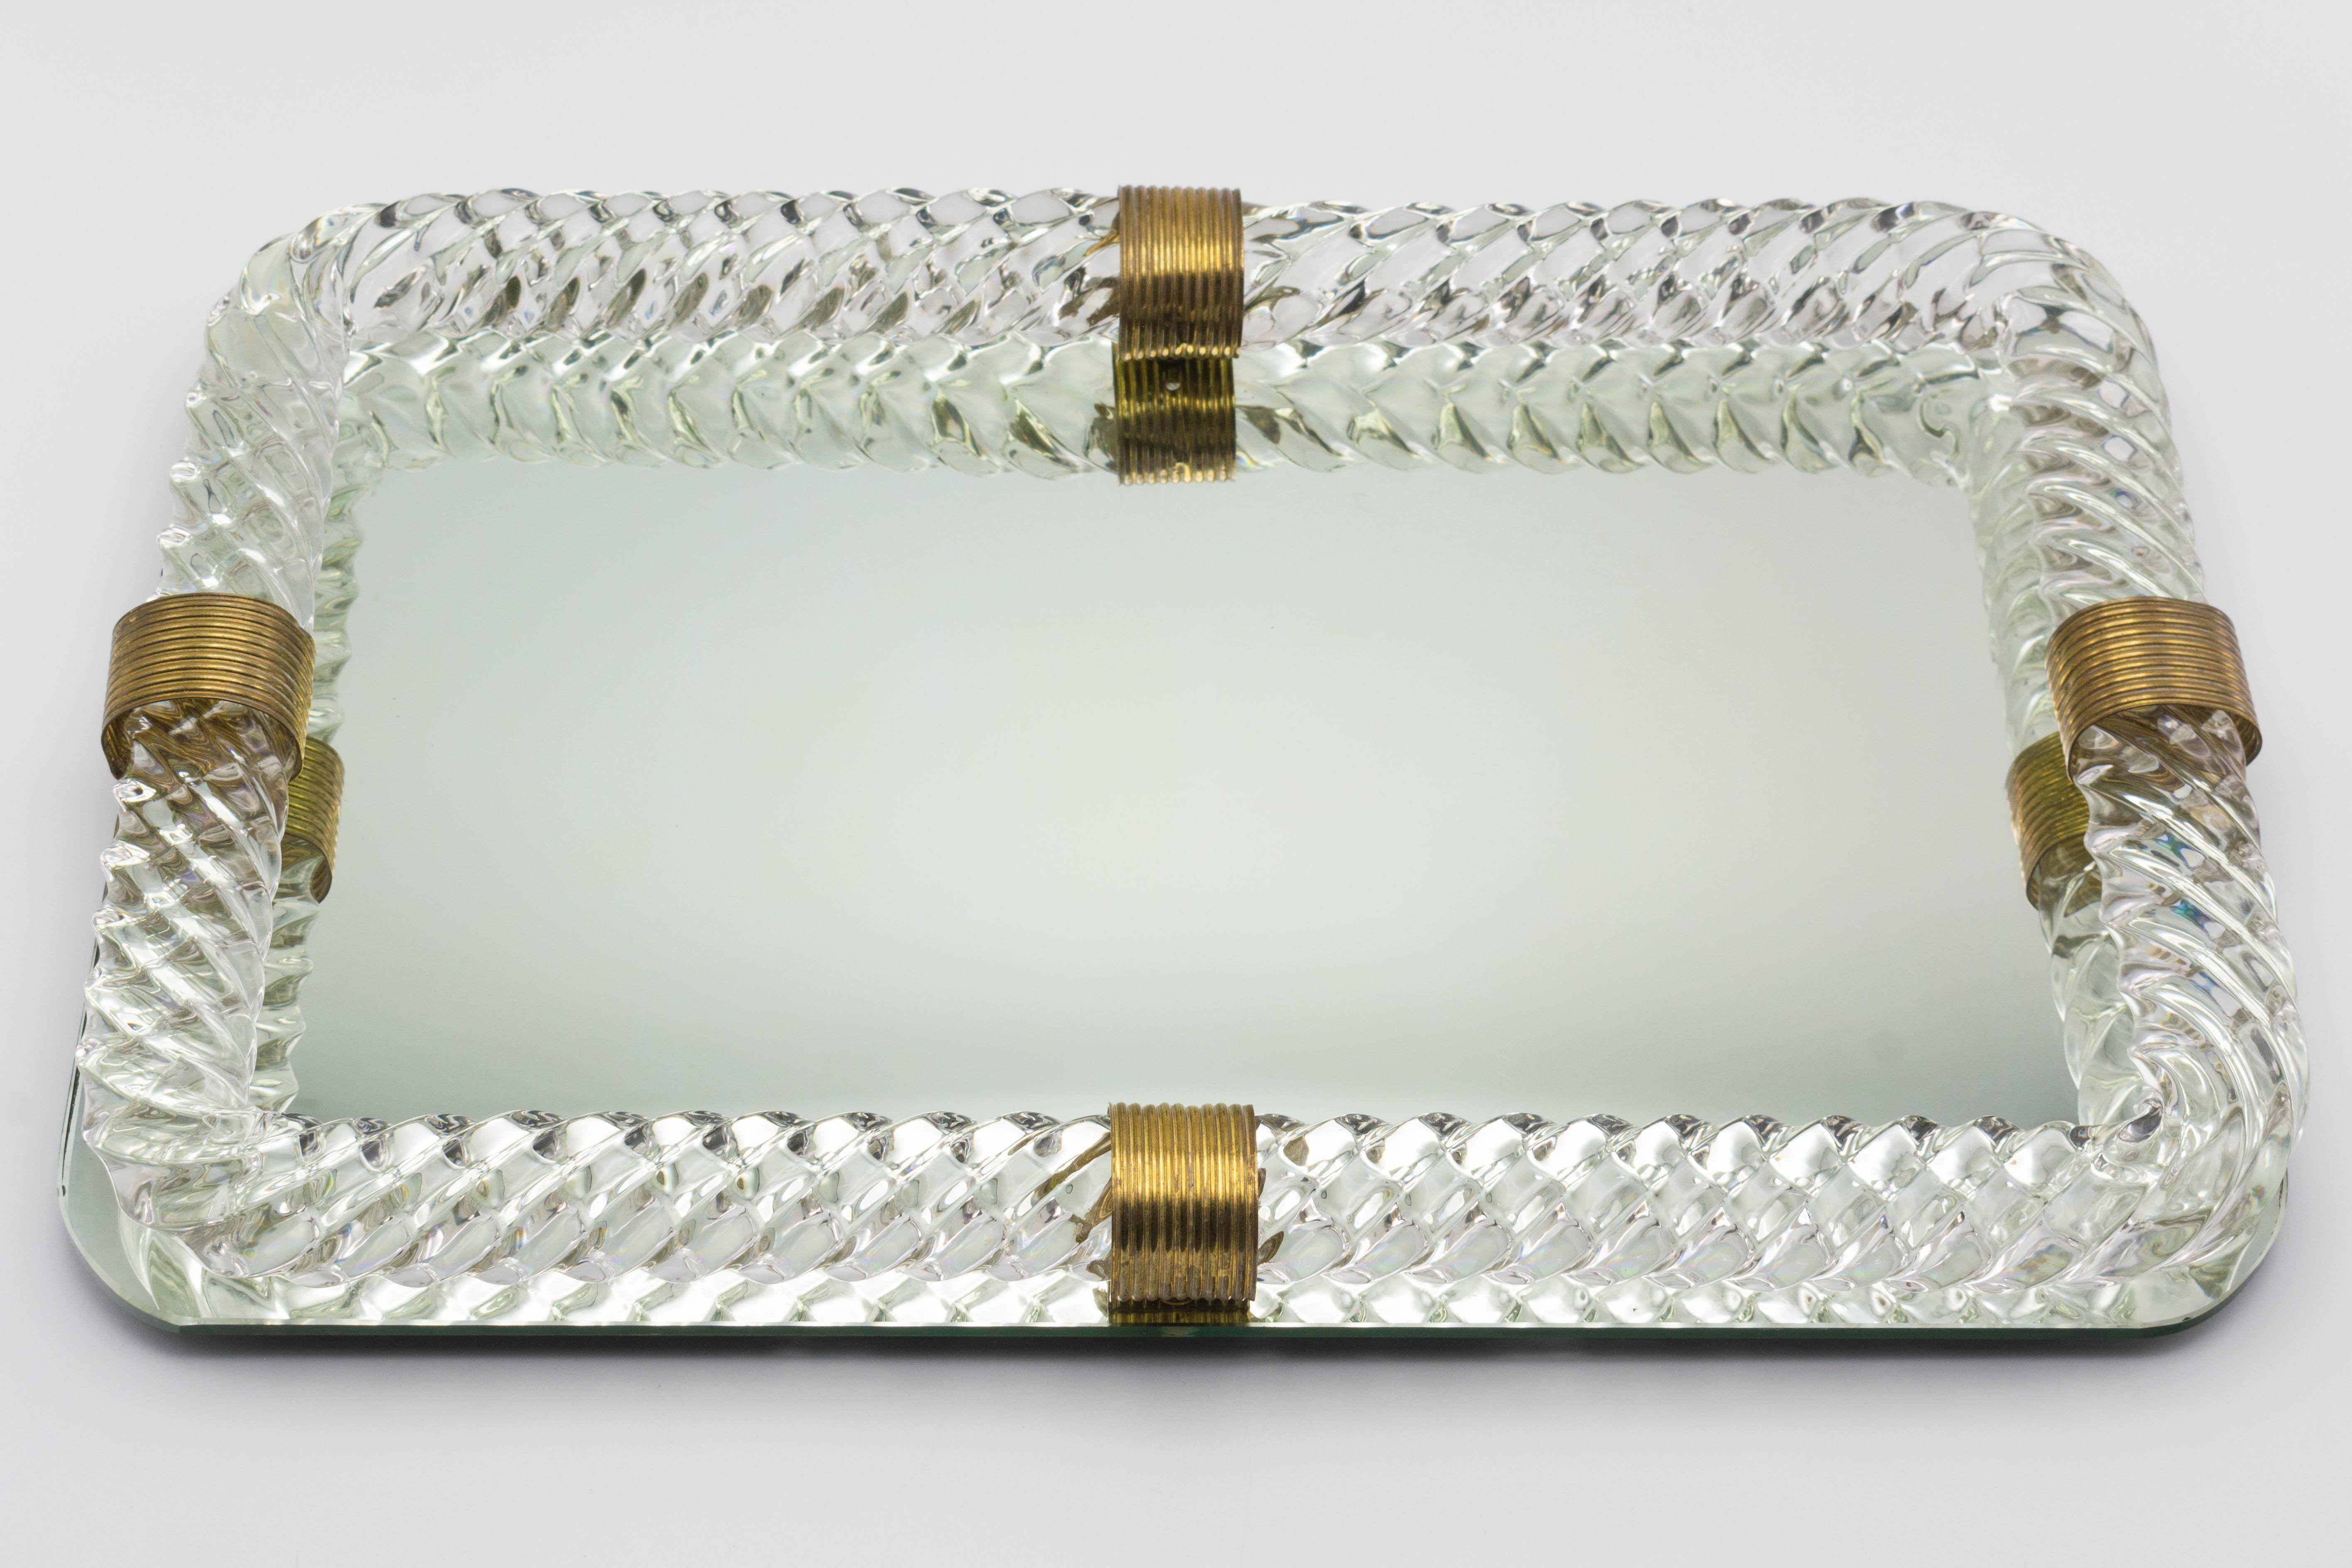 A mid century Italian Murano glass perfume or vanity tray by Paolo Venini. Clear glass twisted rope frame is attached to mirror tray with ribbed stamped brass bands.